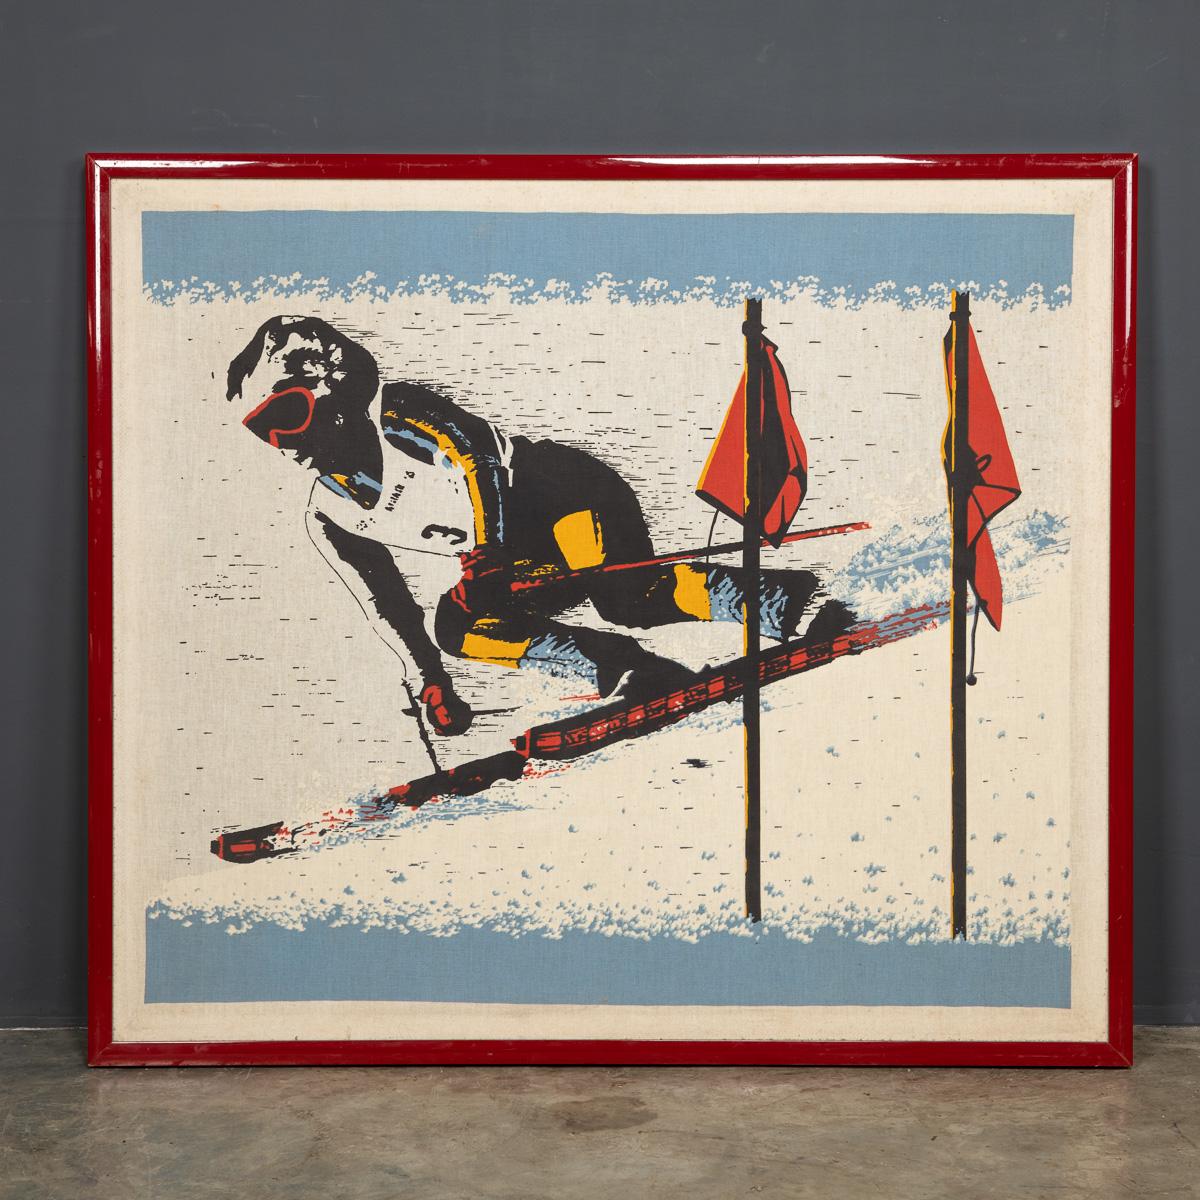 A mid 20th century silk screen print of a slalom downhill ski race. This superb large posters comes with a timeless made to measure custom frame.

Condition
In great condition - No Damage.

Size
Width: 108cm
Height: 95cm.